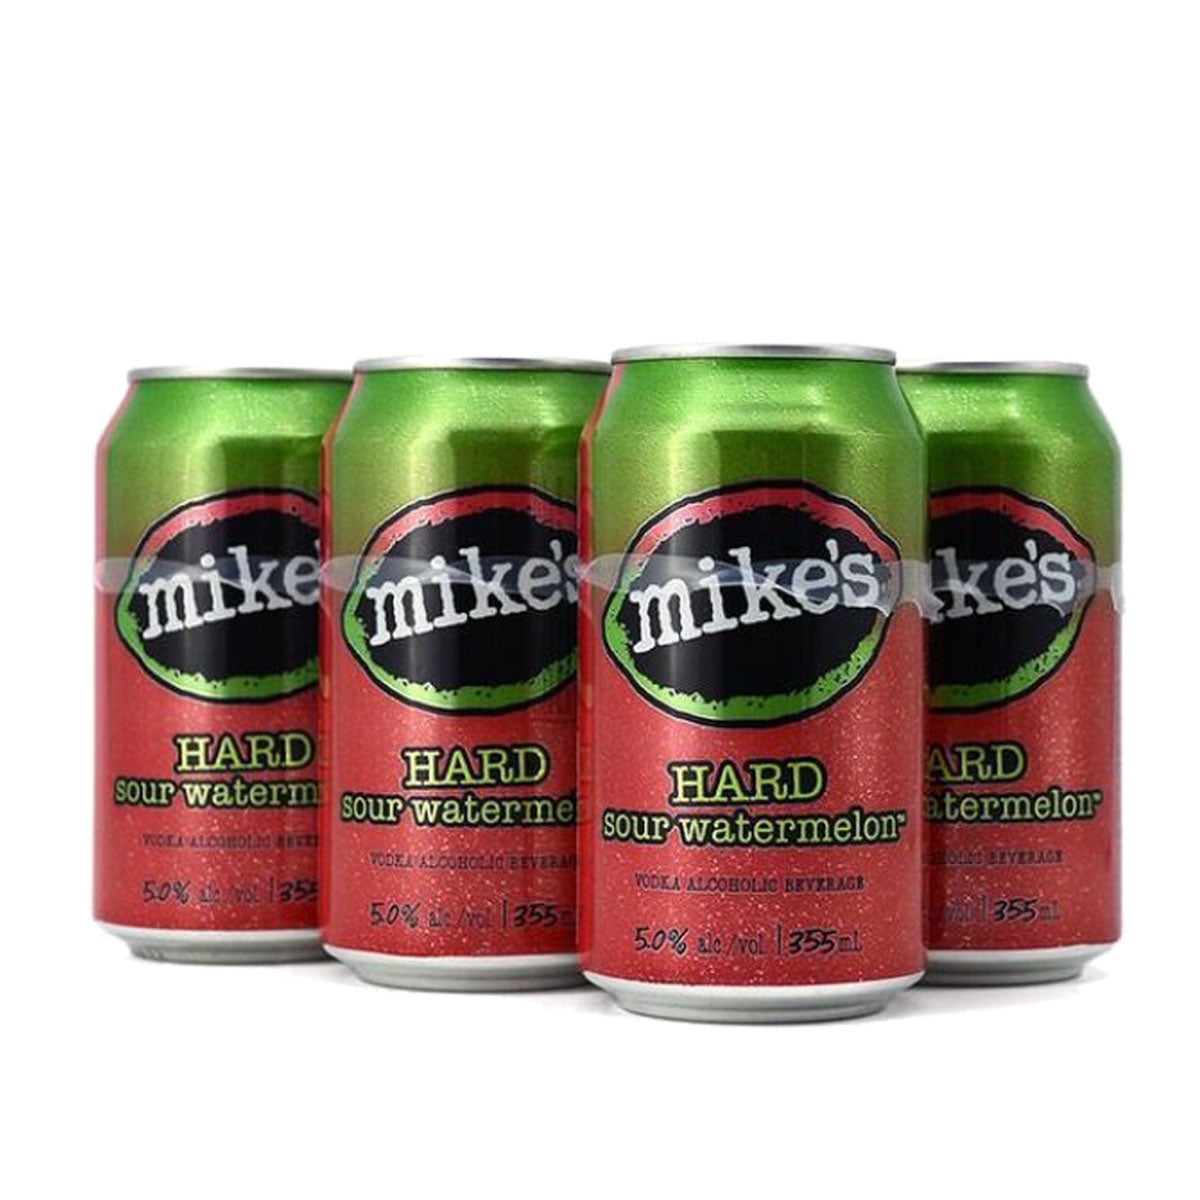 TAG Liquor Stores BC - Mike's Hard Sour Watermelon 6 Pack Cans